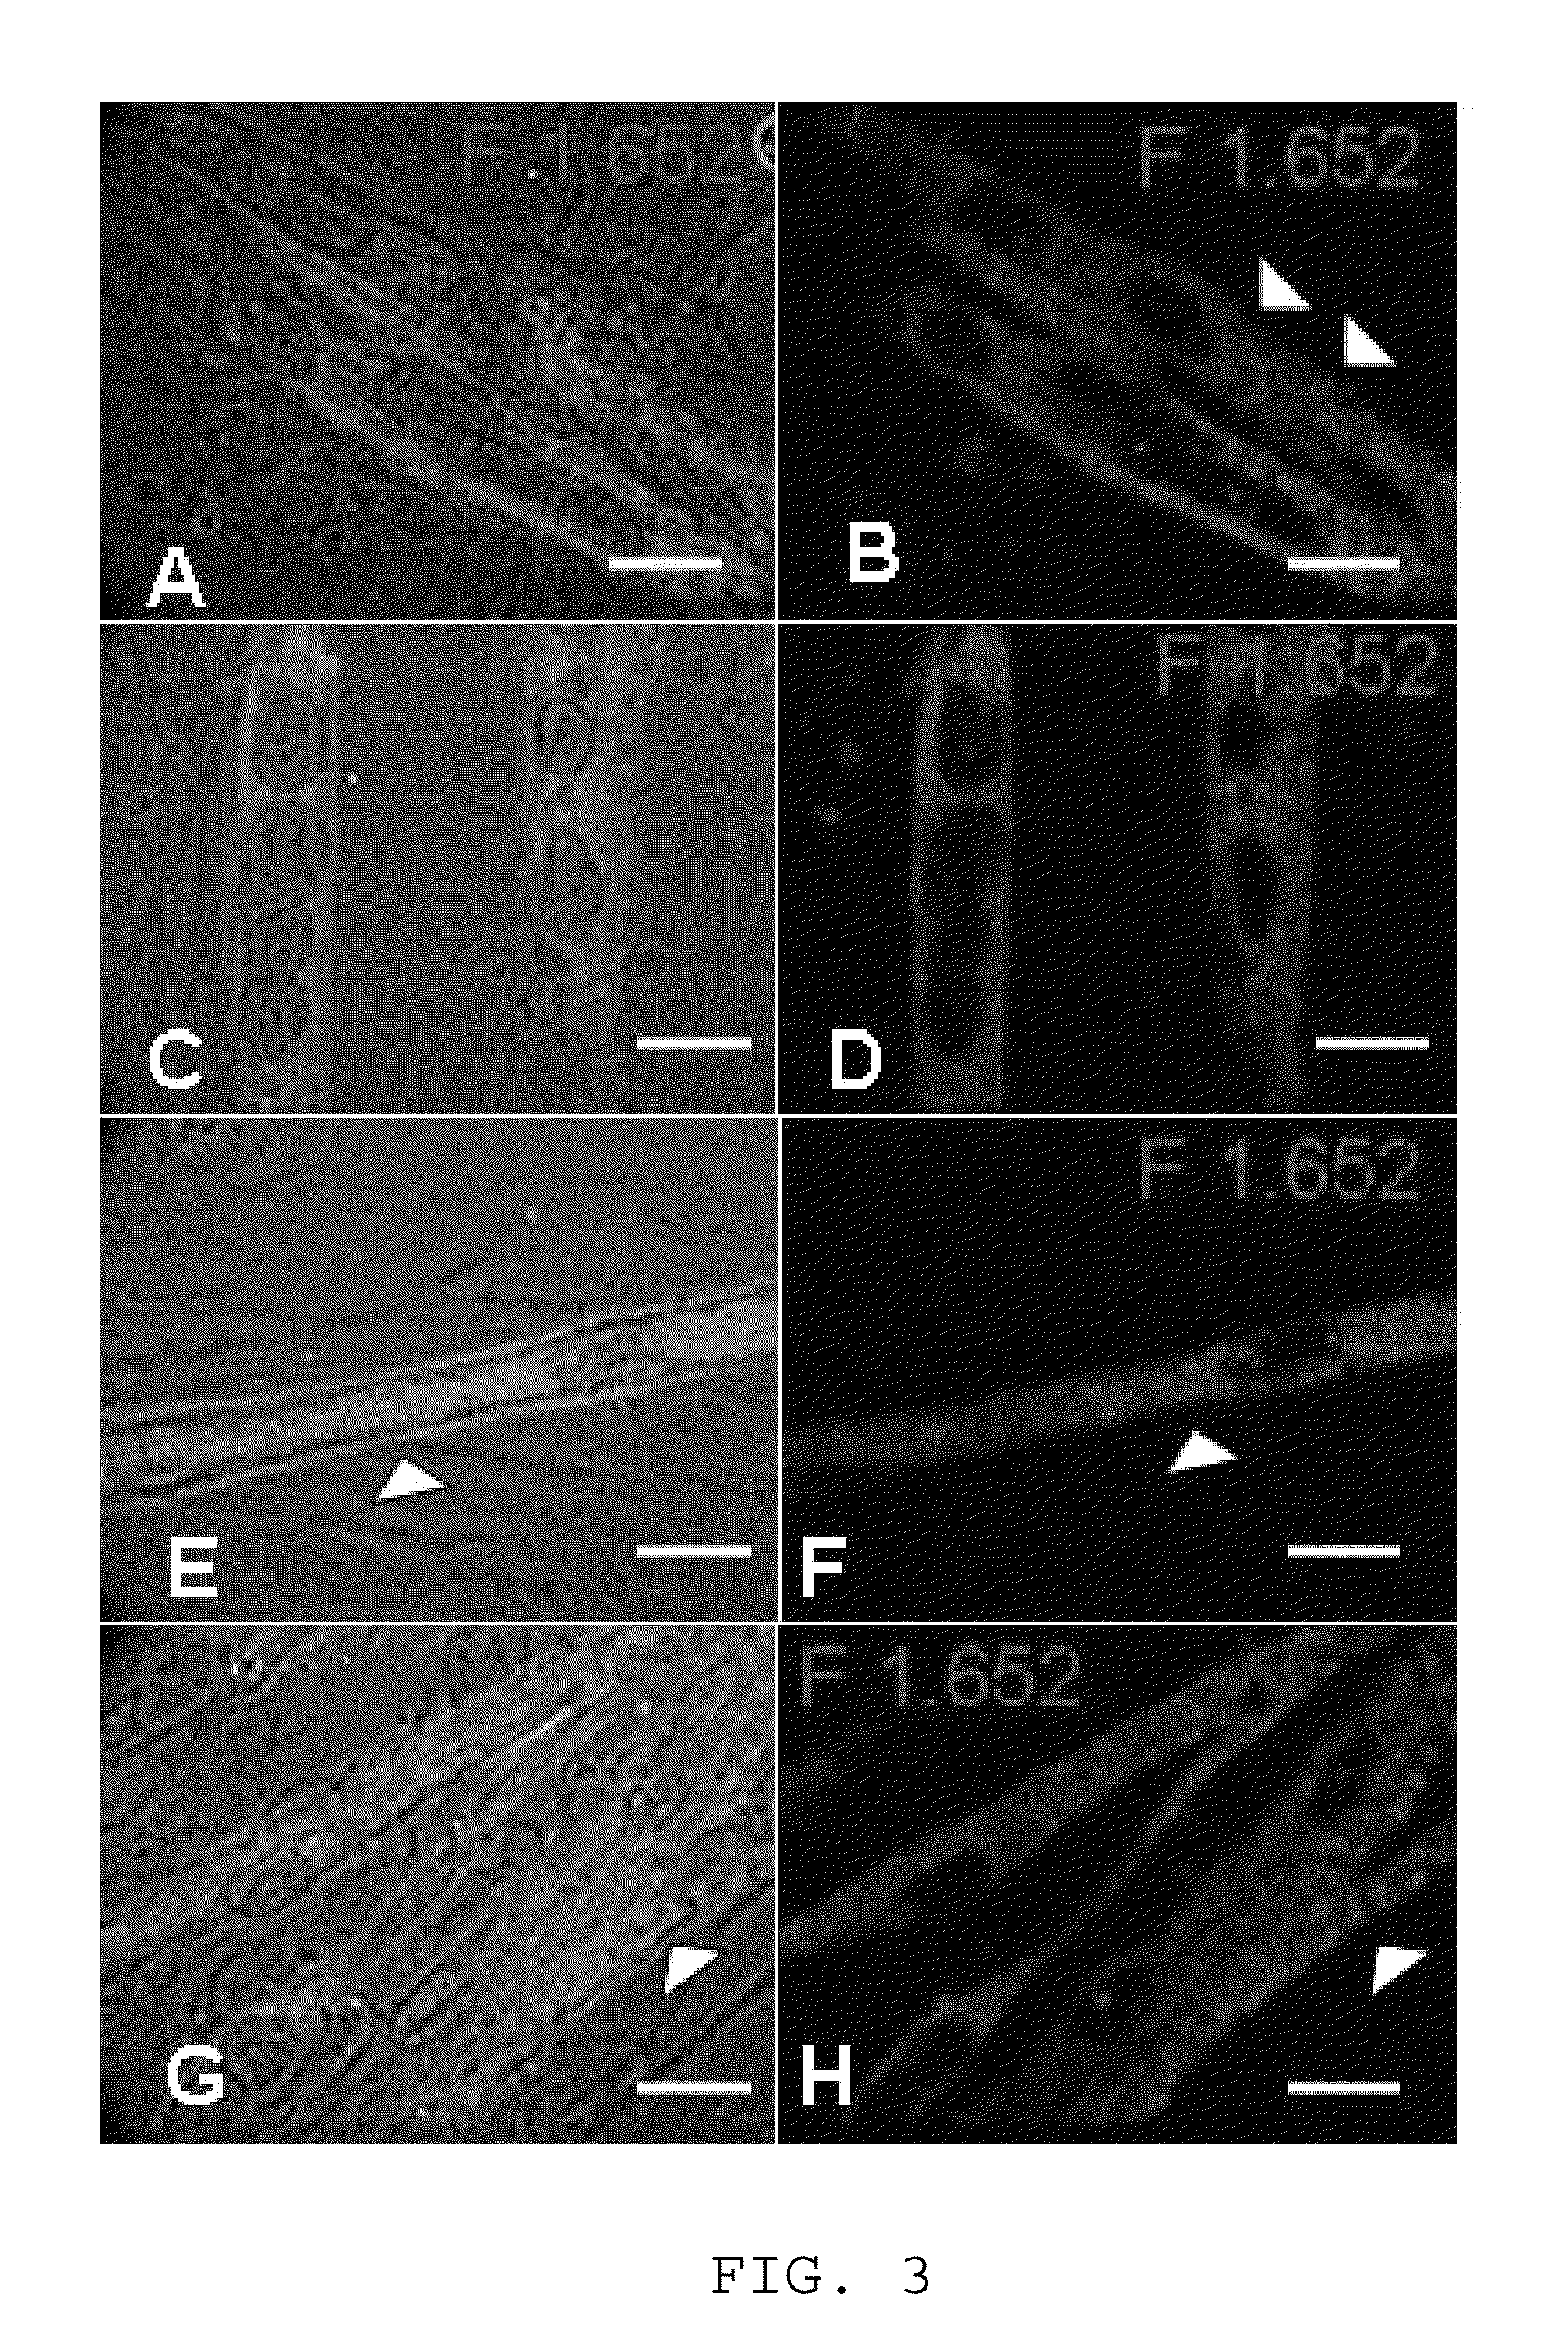 Method for culturing skeletal muscle for tissue engineering